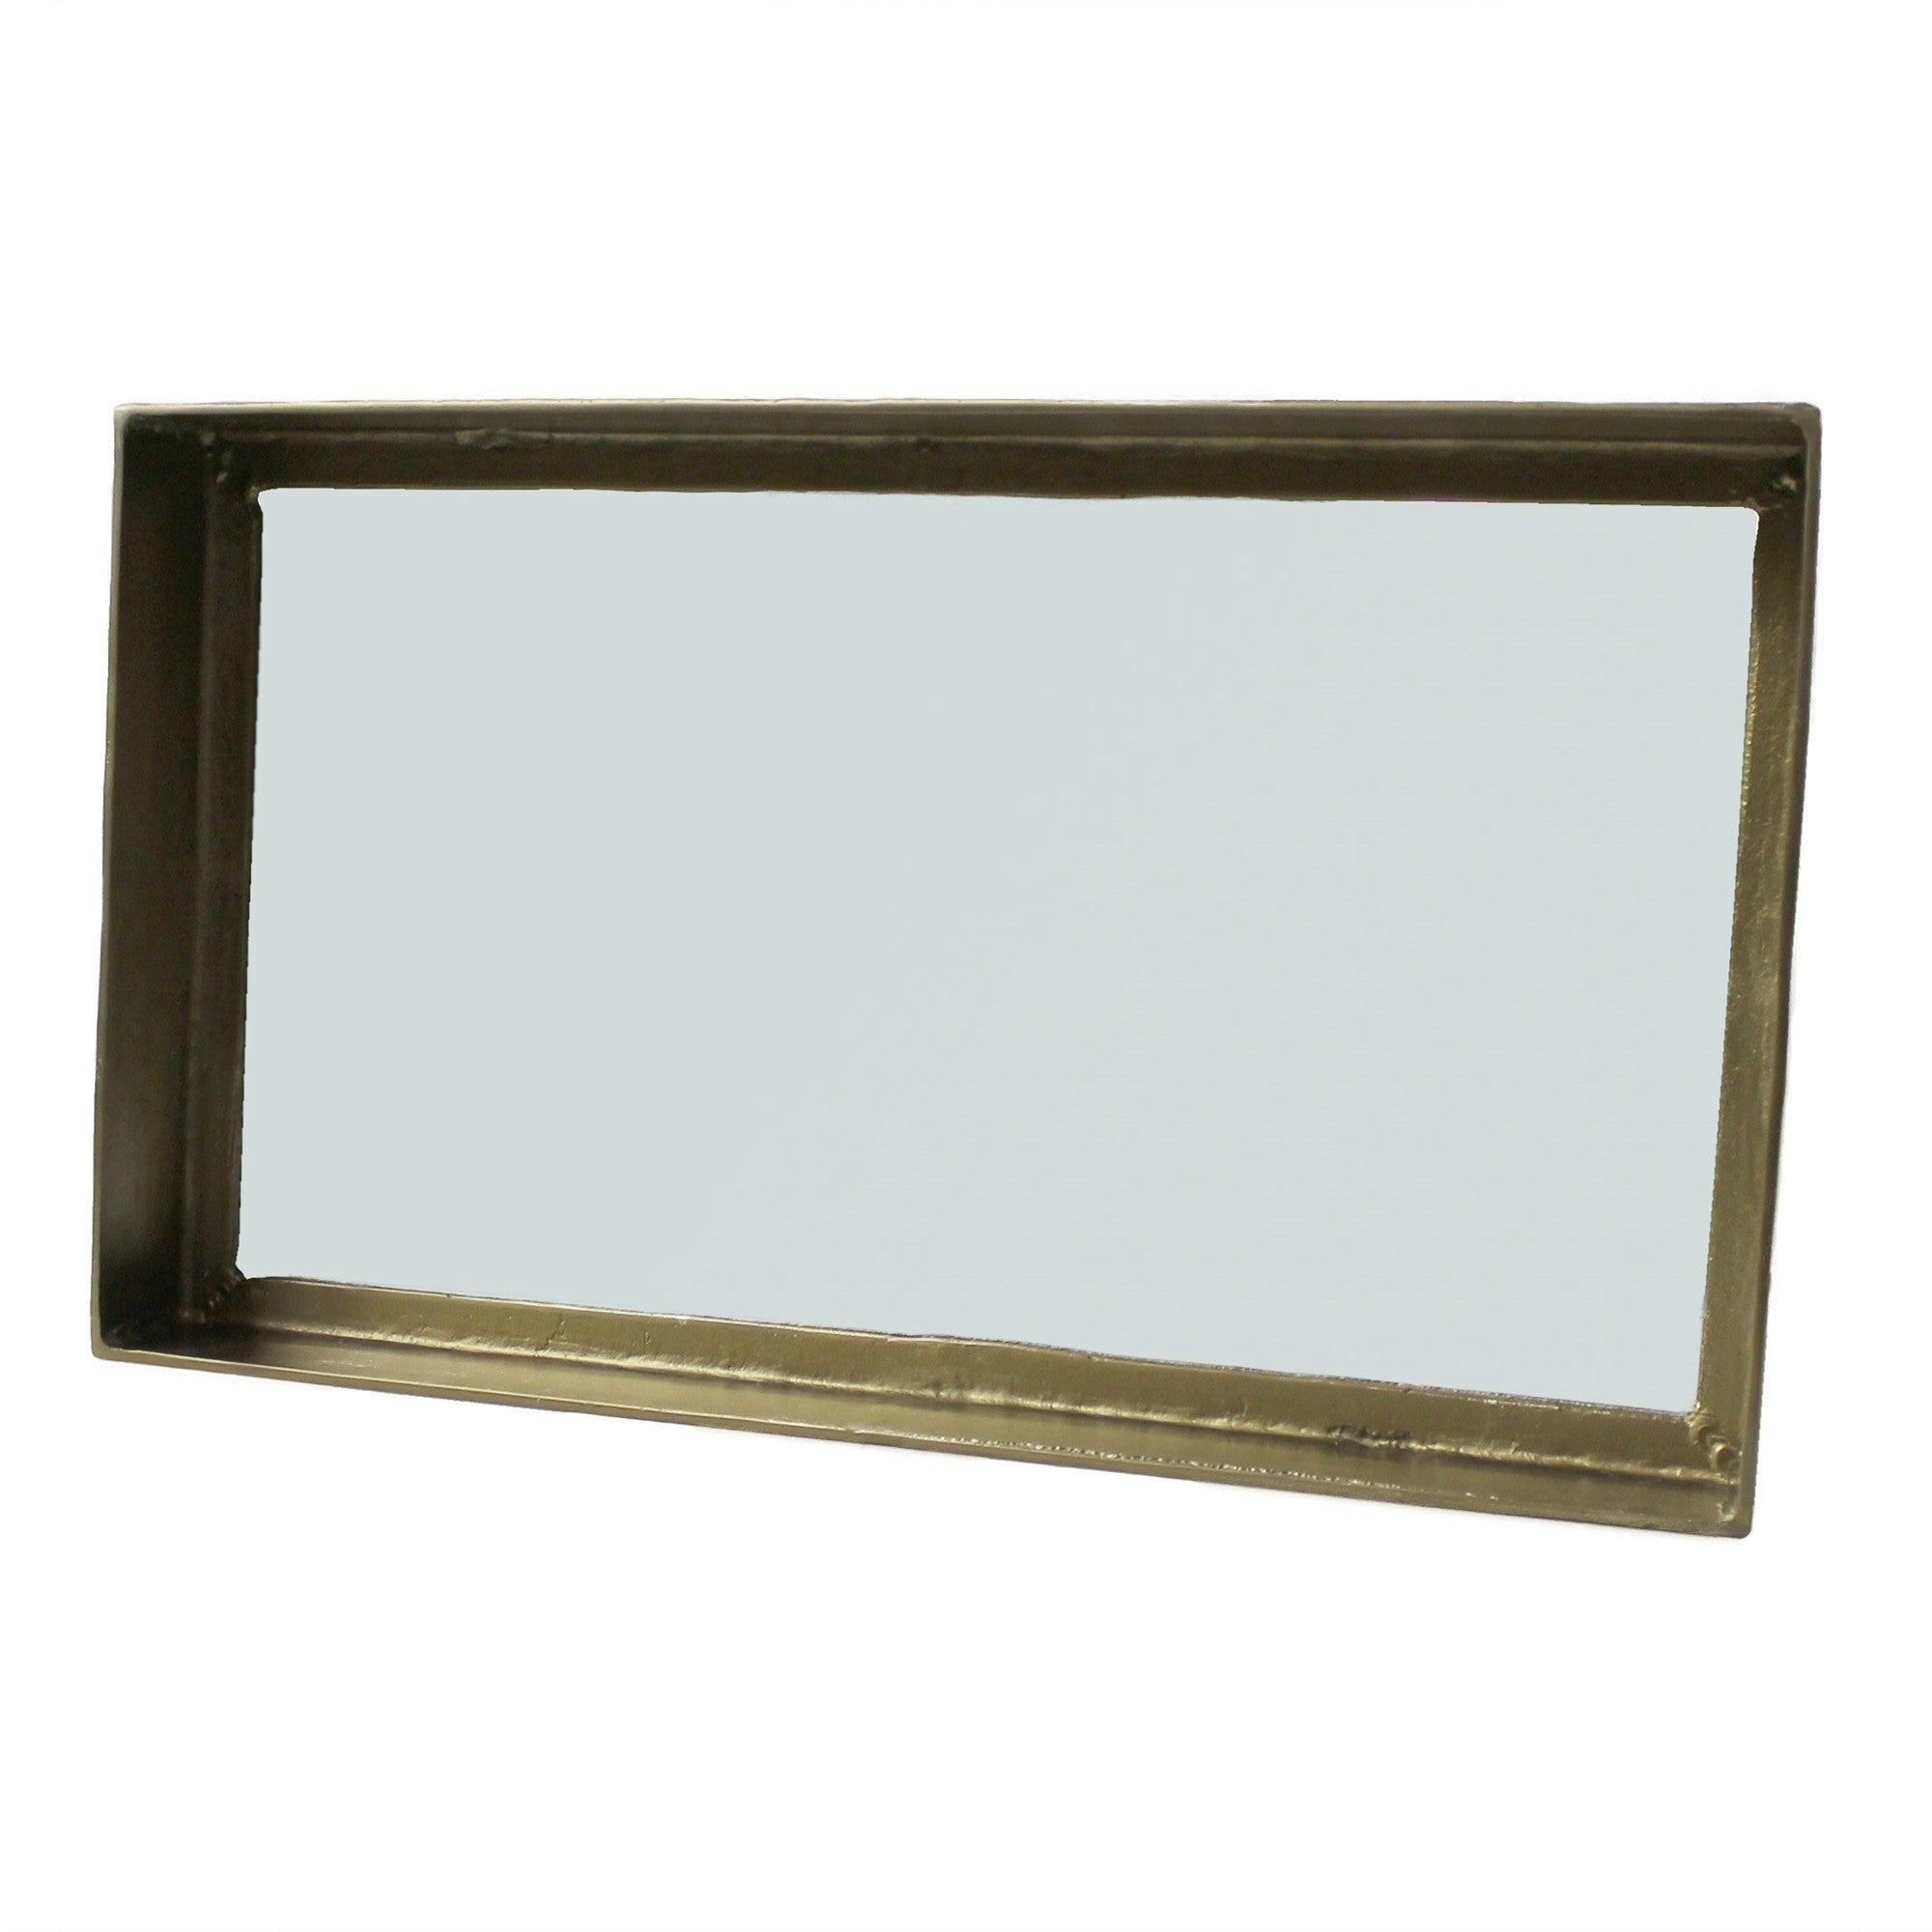 19" Gold Framed Accent Mirror